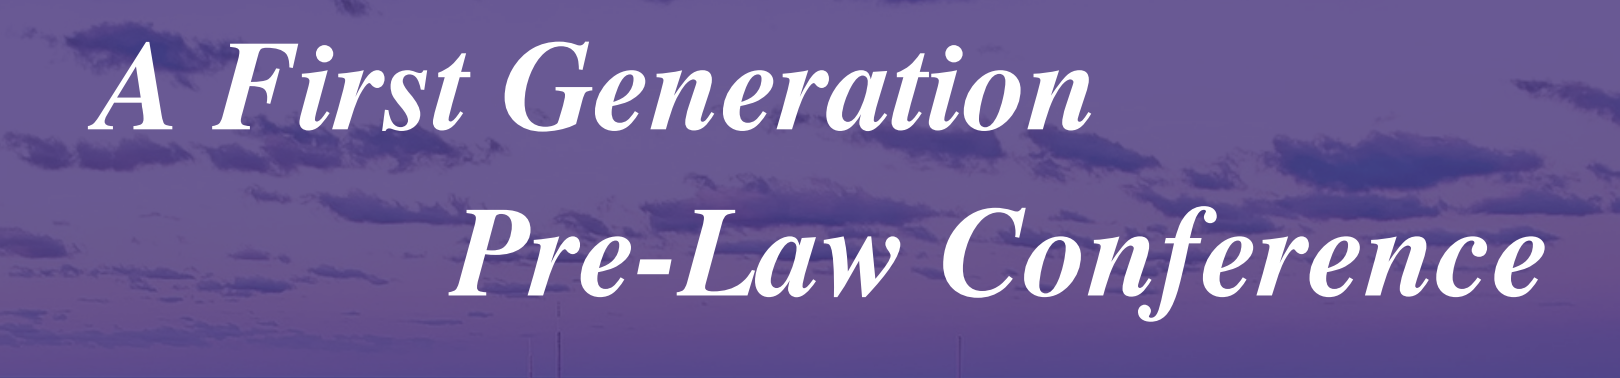 Purple banner that says "A First Generation Pre-Law Conference"